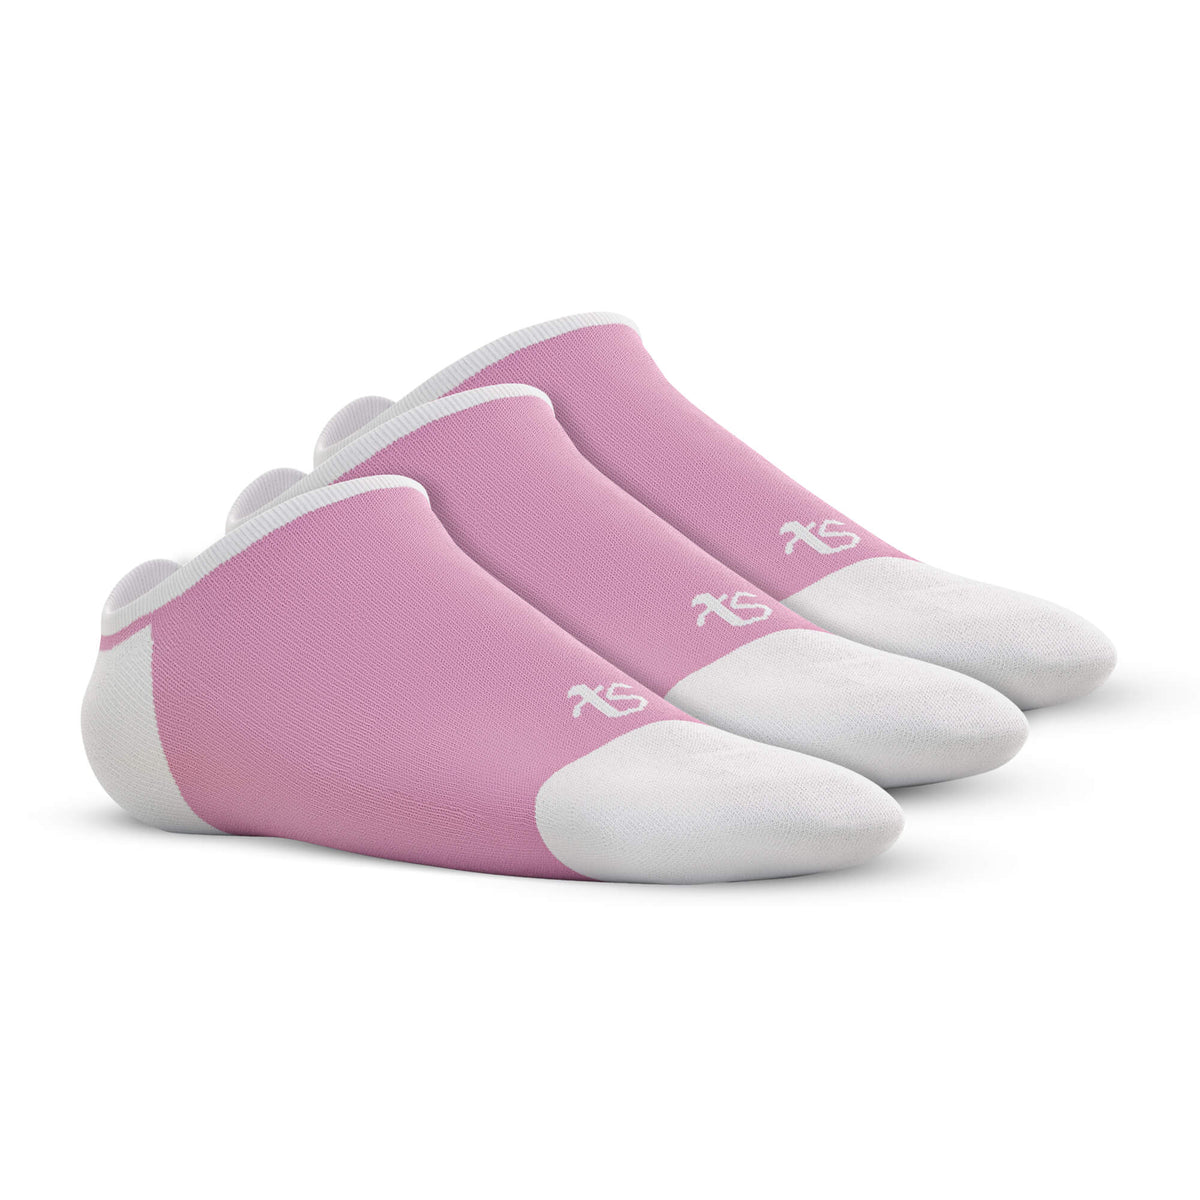 Loafer – See me – Pink, White & White – Set of 3